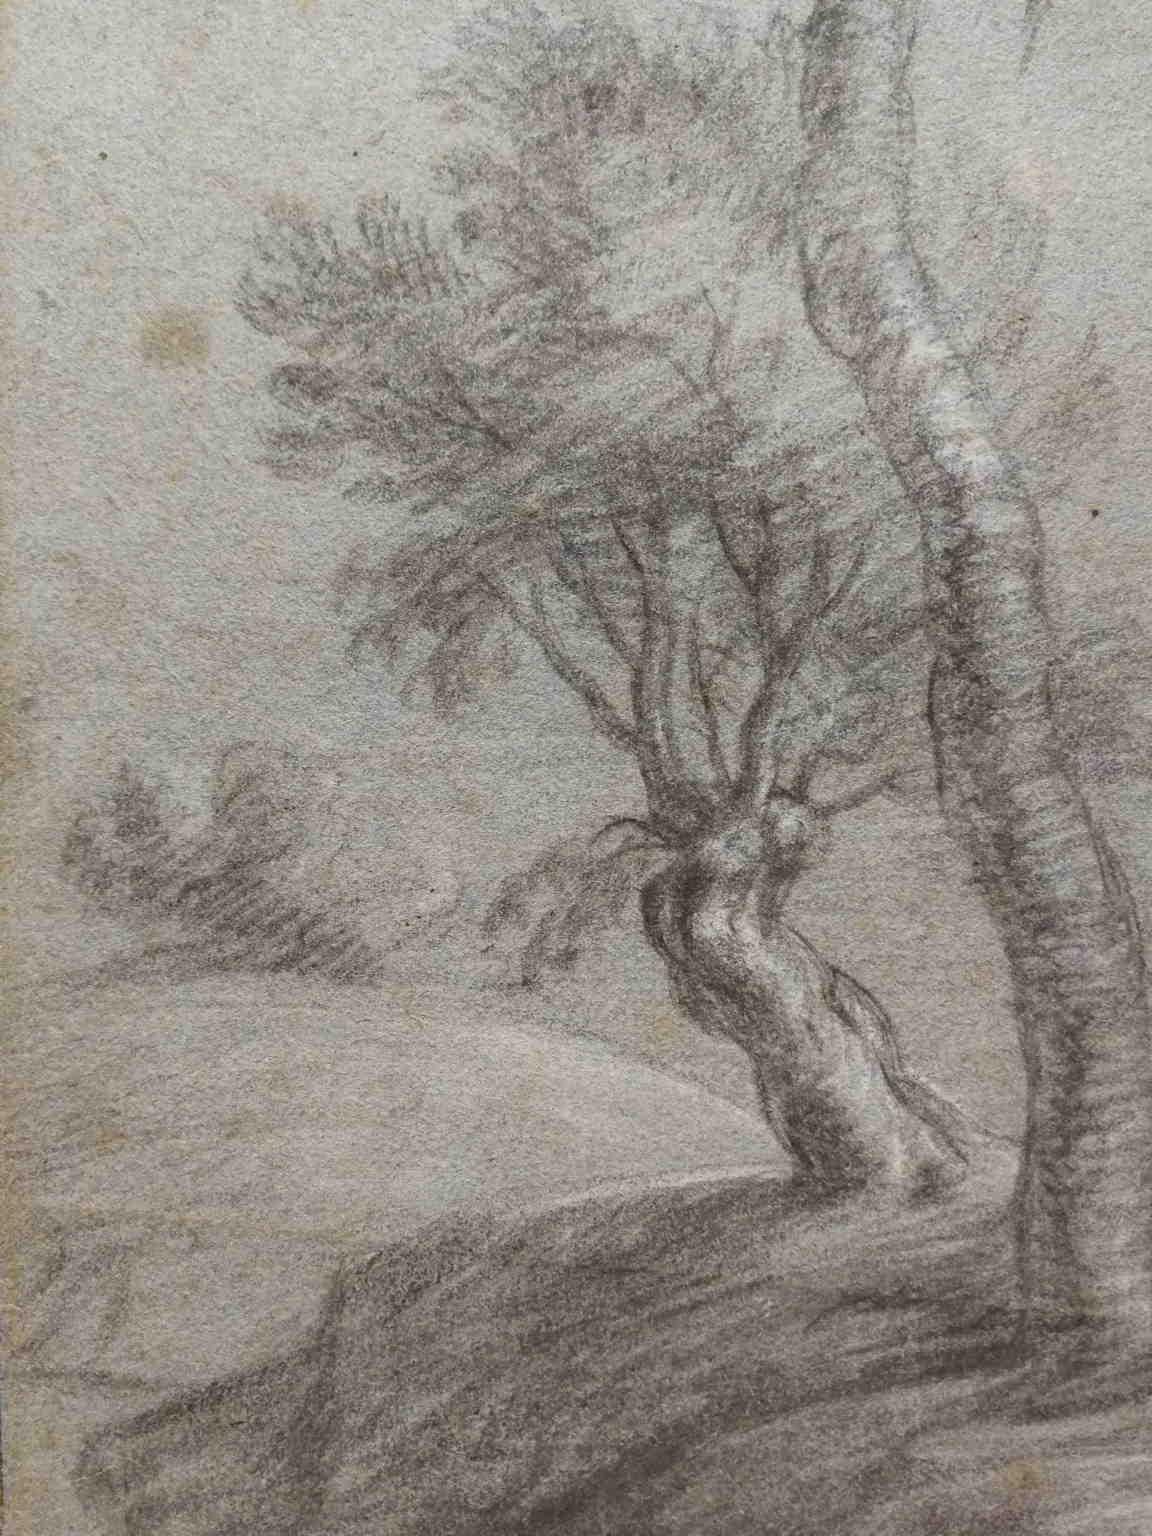 Attributed G Dughet Landscape Drawing 17 century pencil white lead paper